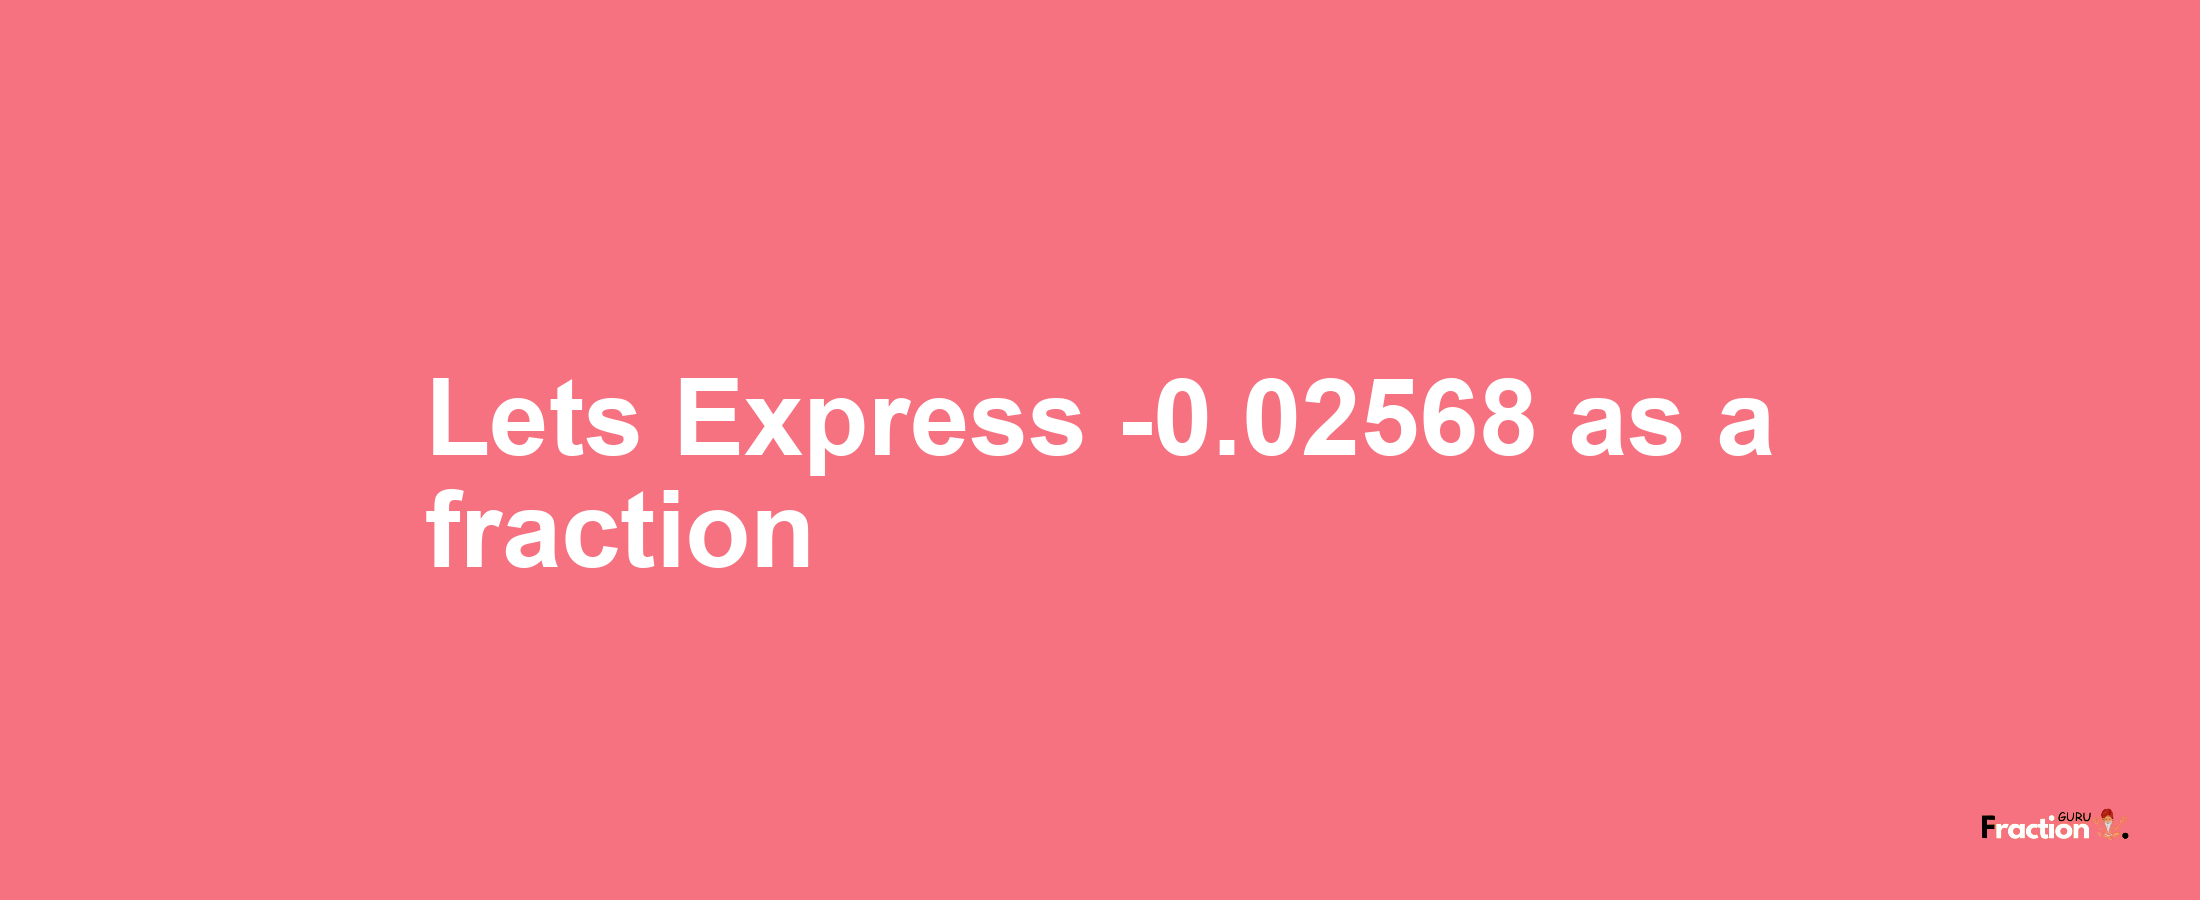 Lets Express -0.02568 as afraction